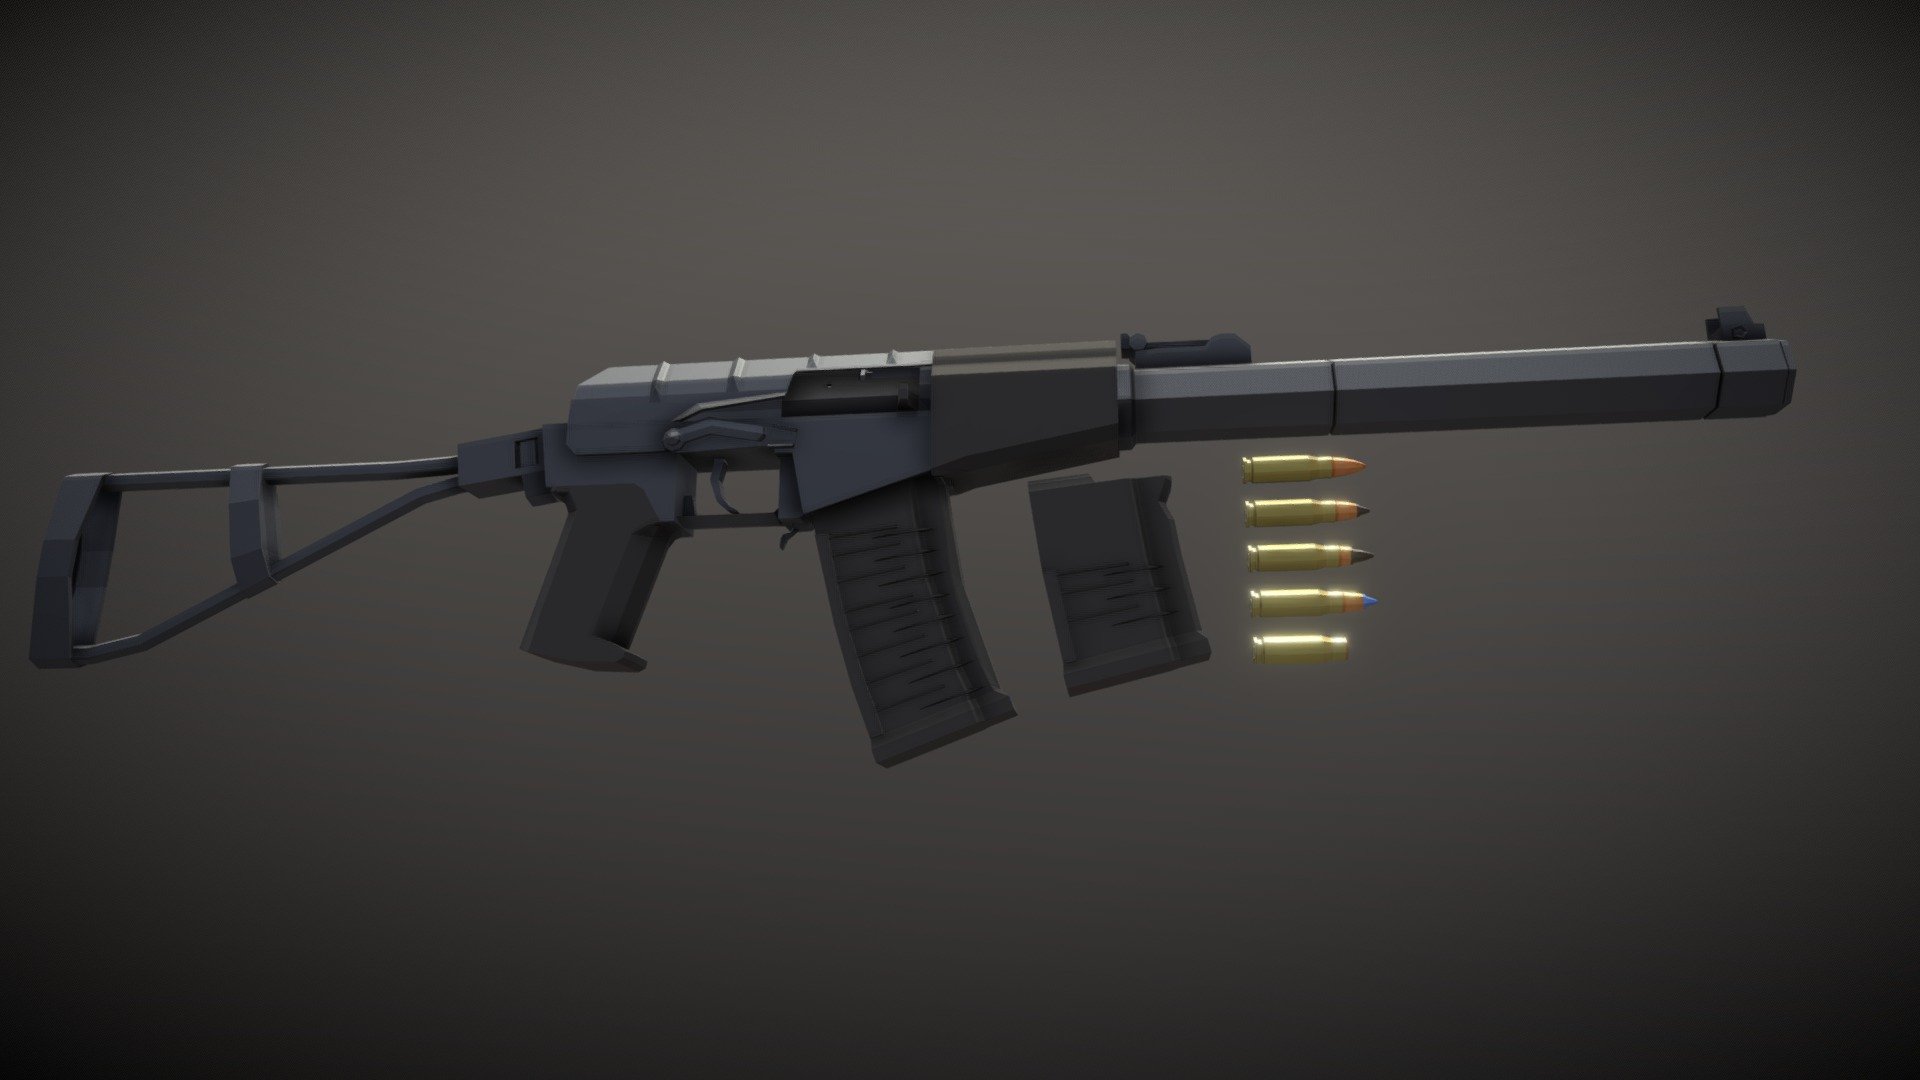 Low-Poly model of the Avtomát Spetsiálny, a well-known russian suppressed assault rifle chambered in 9x39, a cartridge intended to deliver the same energy as a conventional rifle round but at much quieter sub-sonic velocities. 

Included are rifle, 20 and 30 round magazines, a round of standard ammunition, one of +P (increased pressure, velocity and sound), two different AP rounds and a casing 3d model